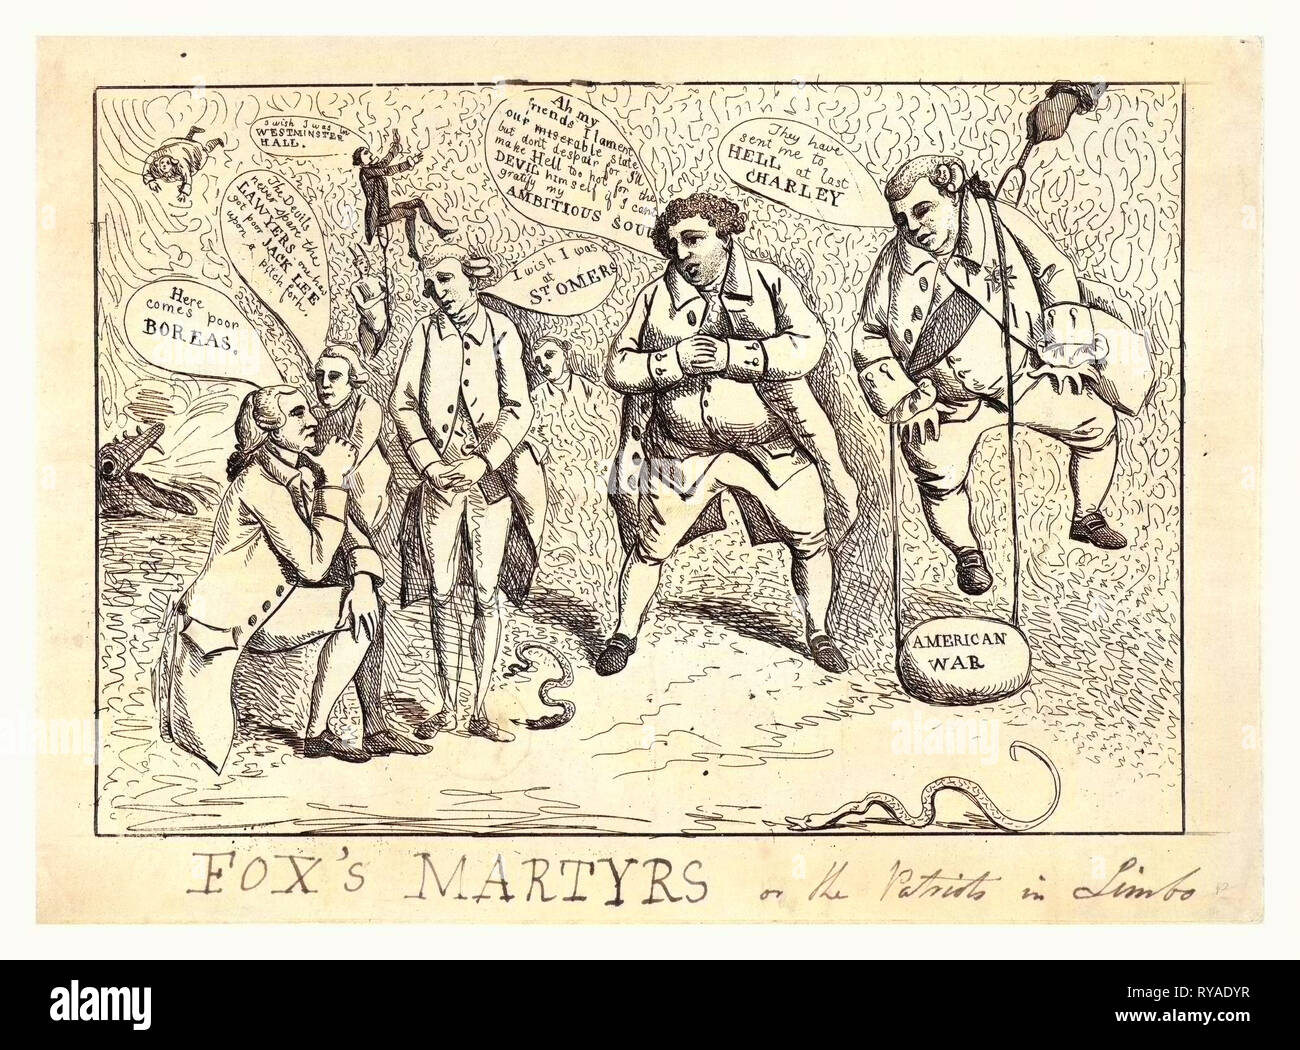 Fox's Martyrs or the Patriots in Limbo, [England : Publisher Not Named, March 1784], 1 Print: Etching , 25.2 X 34.9  (Plate), Print Shows Charles James Fox's Martyrs During the American Revolution. On the Right, Frederick, Lord North, Hangs from a Devil's Pitchfork and Wears a Large Stone Labeled American War from His Neck. In the Center, Charles Fox Apologizes for His Actions, in the Aftermath of the 1784 General Election. The 1784 Parliamentary Election Was the First National Election. The Fox-North Coalition Came Under Attack by George III and William Pitt the Younger. Stock Photo